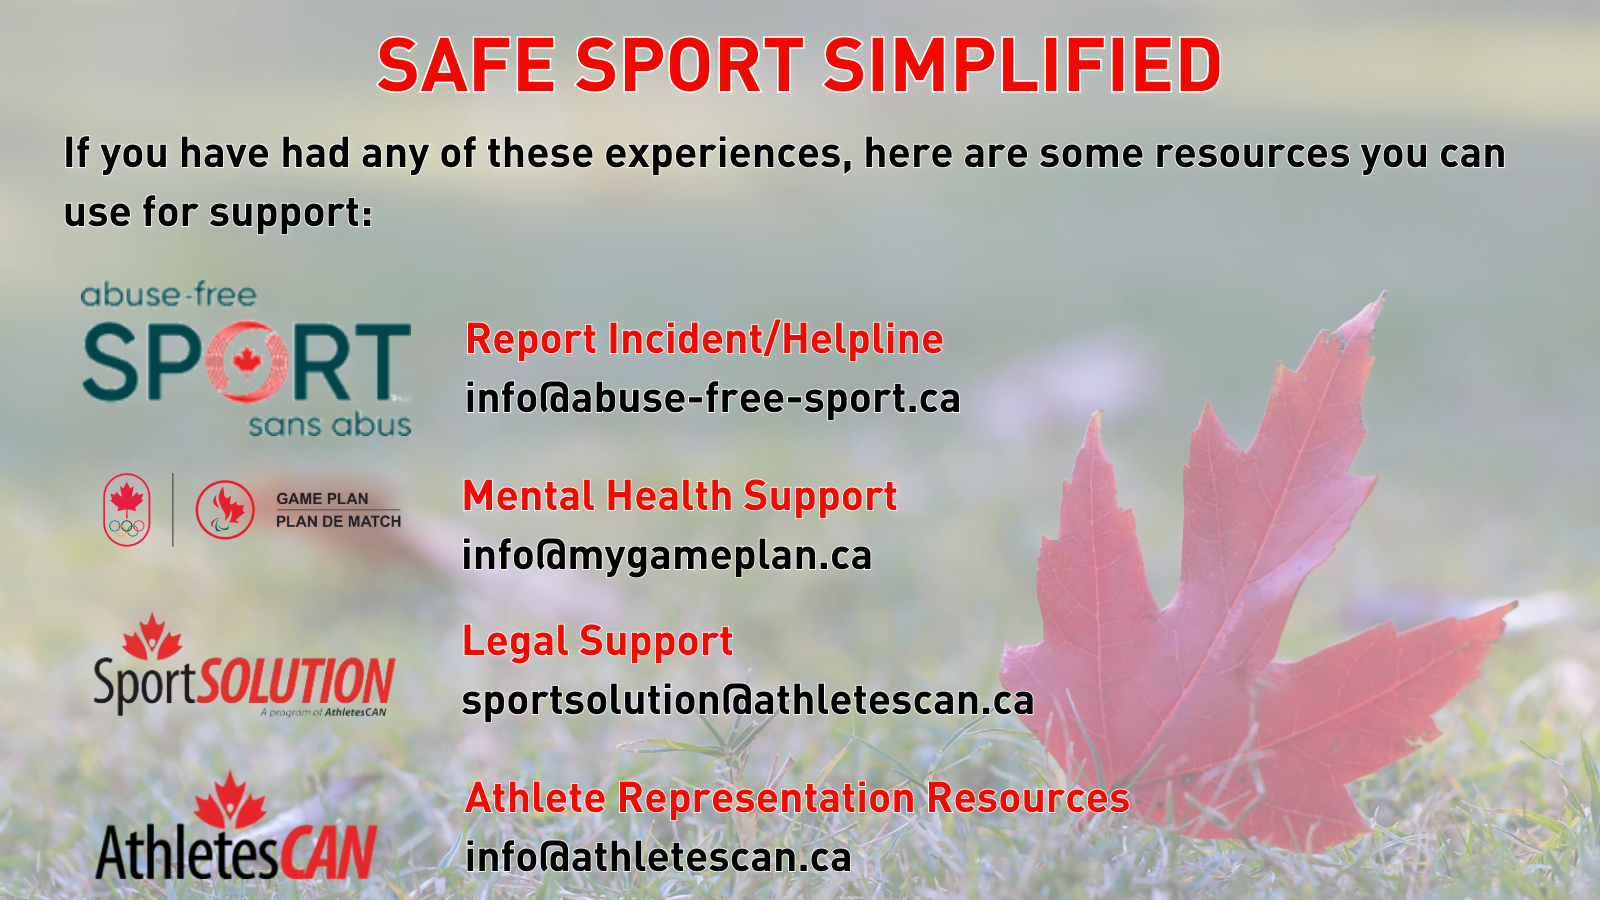 If you have had any of these experiences, here are some resources you can use for support: Abuse-Free Sport: Report Incident/Helpline - info@abuse-free-sport.ca Game Plan: Mental Health Support - info@mygameplan.ca Sport Solution: Legal Support - sportsolution@athletescan.ca AthletesCAN: Athlete Representation Resources - info@athletescan.ca